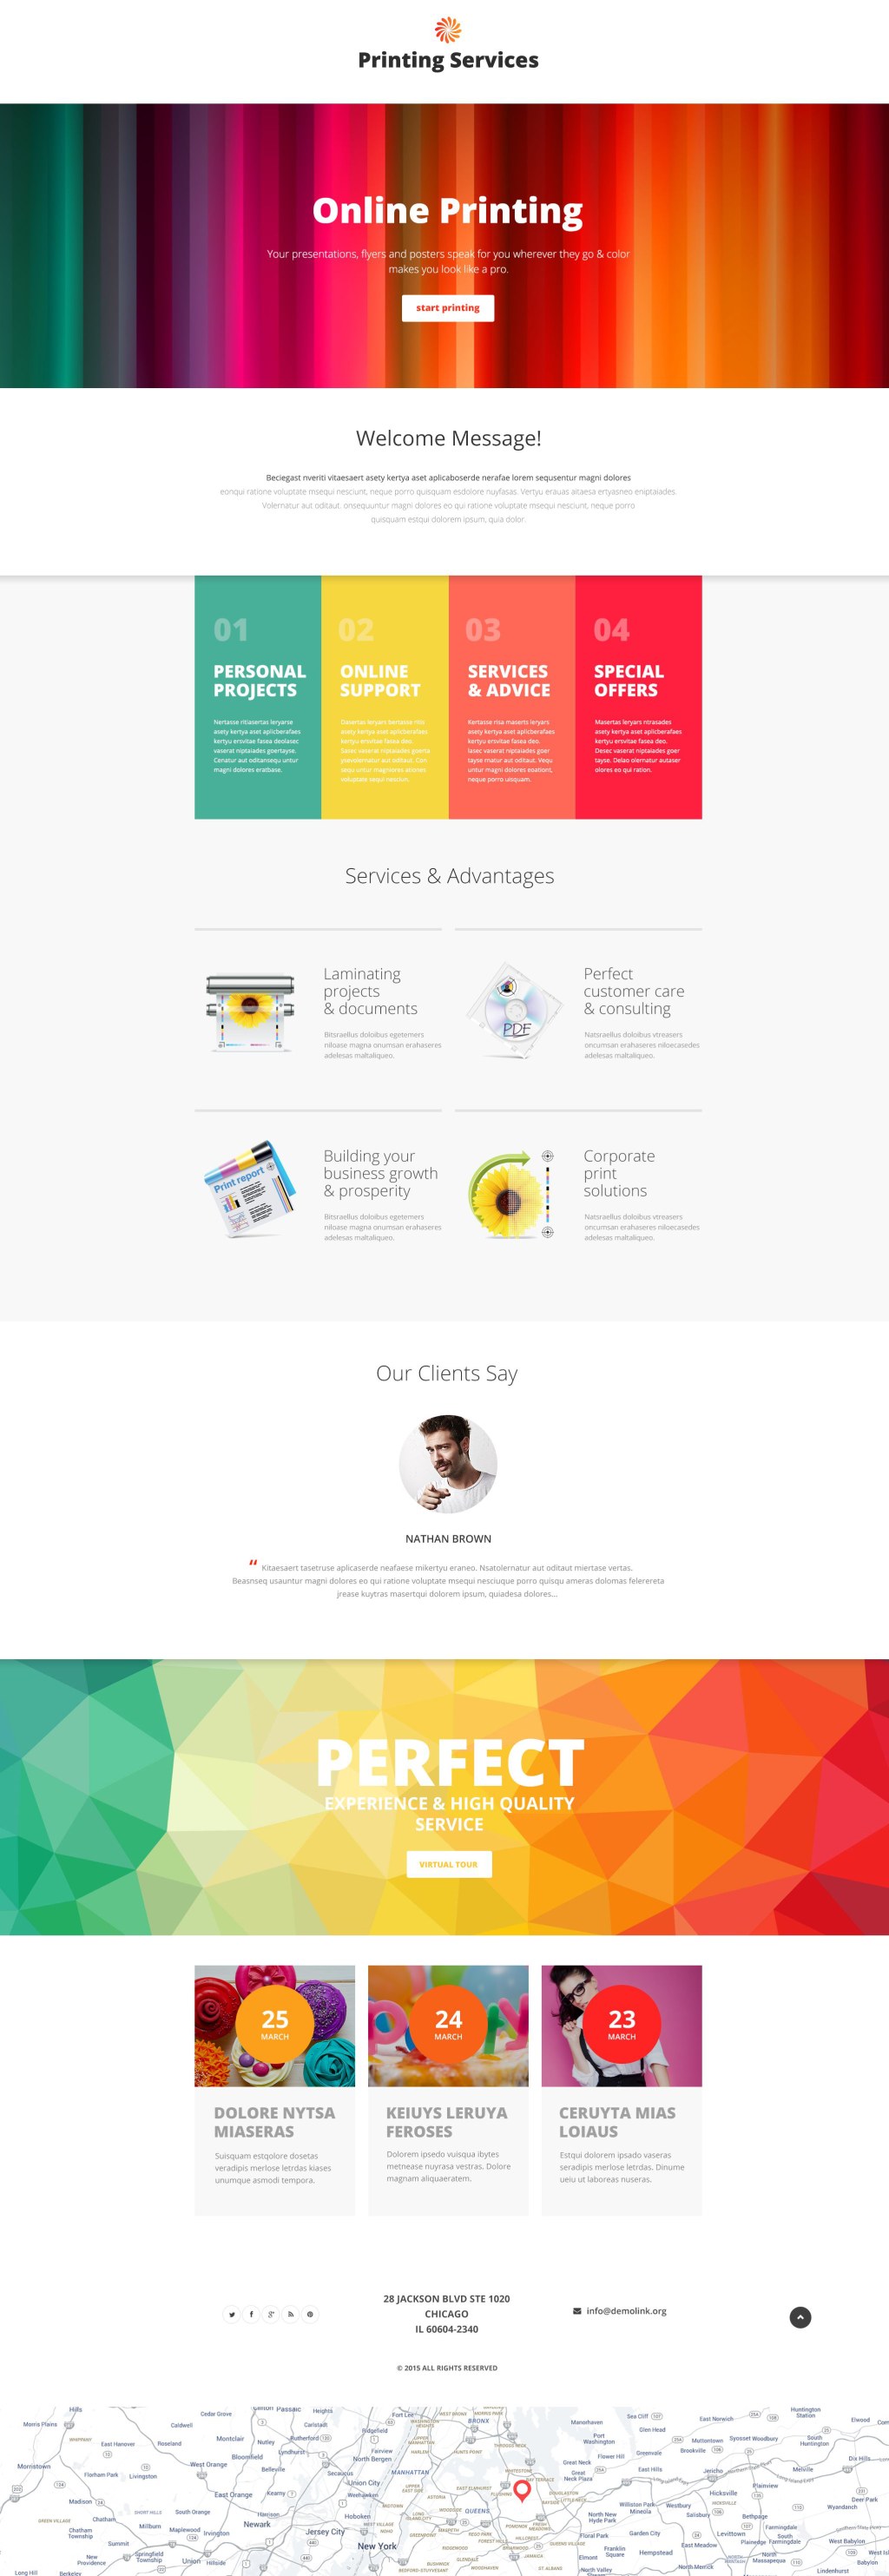 printing business website templates - Print Shop Responsive Landing Page Template